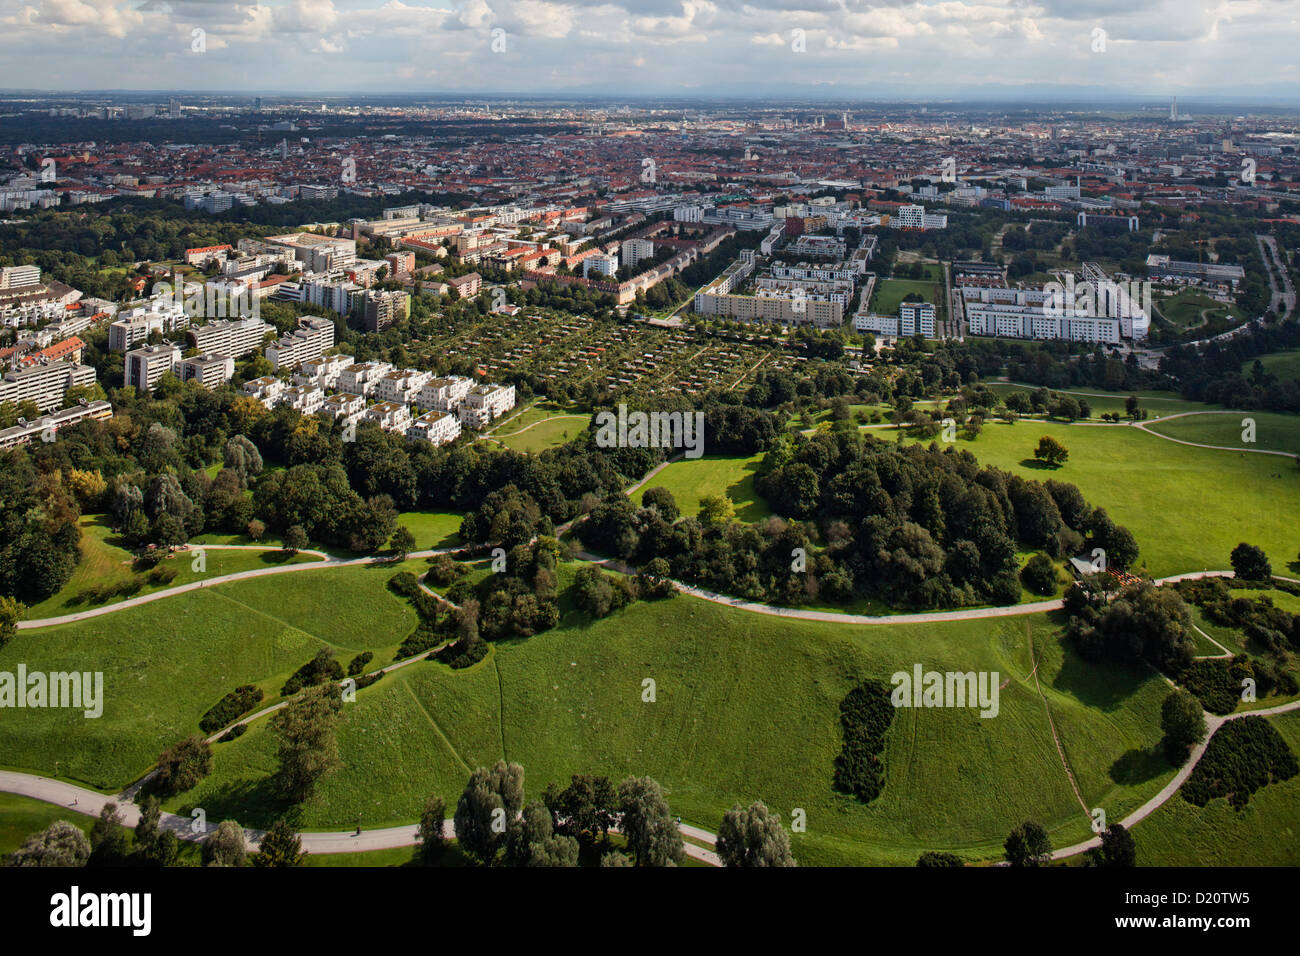 High angle view of the Olympiapark, Park, built for the olympic games in 1972, Munich, Upper Bavaria, Bavaria, Germany, Europe Stock Photo